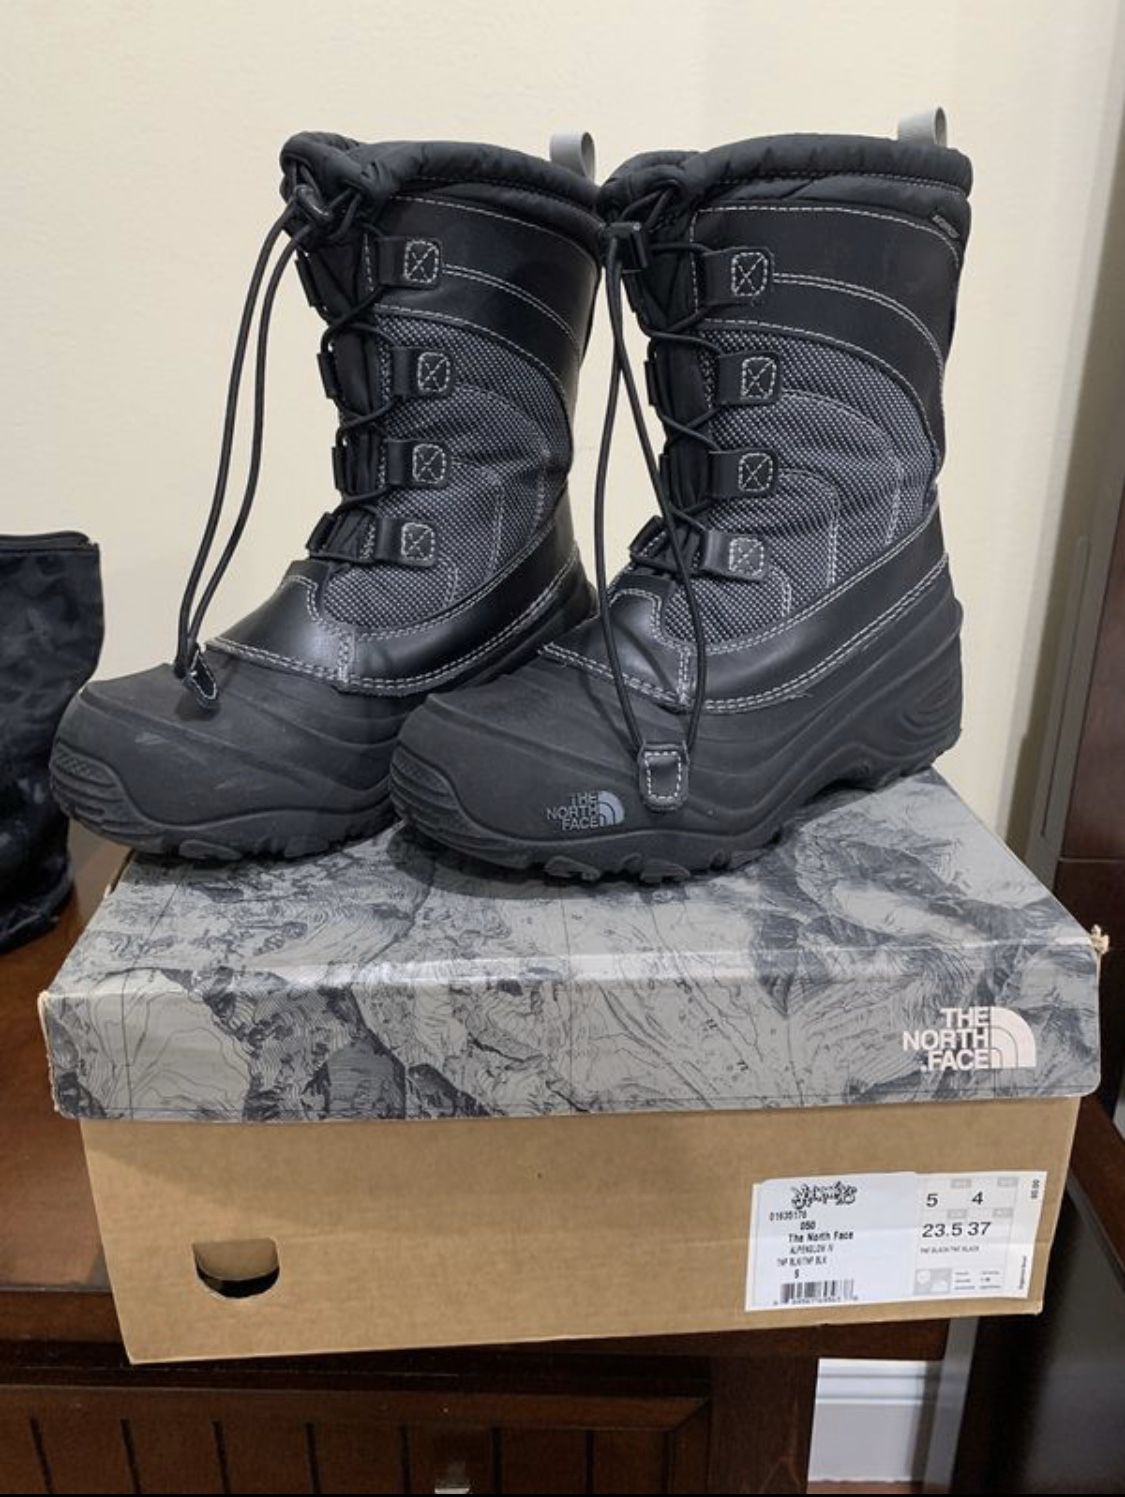 Kids north face winter/snow boots size 5 $20